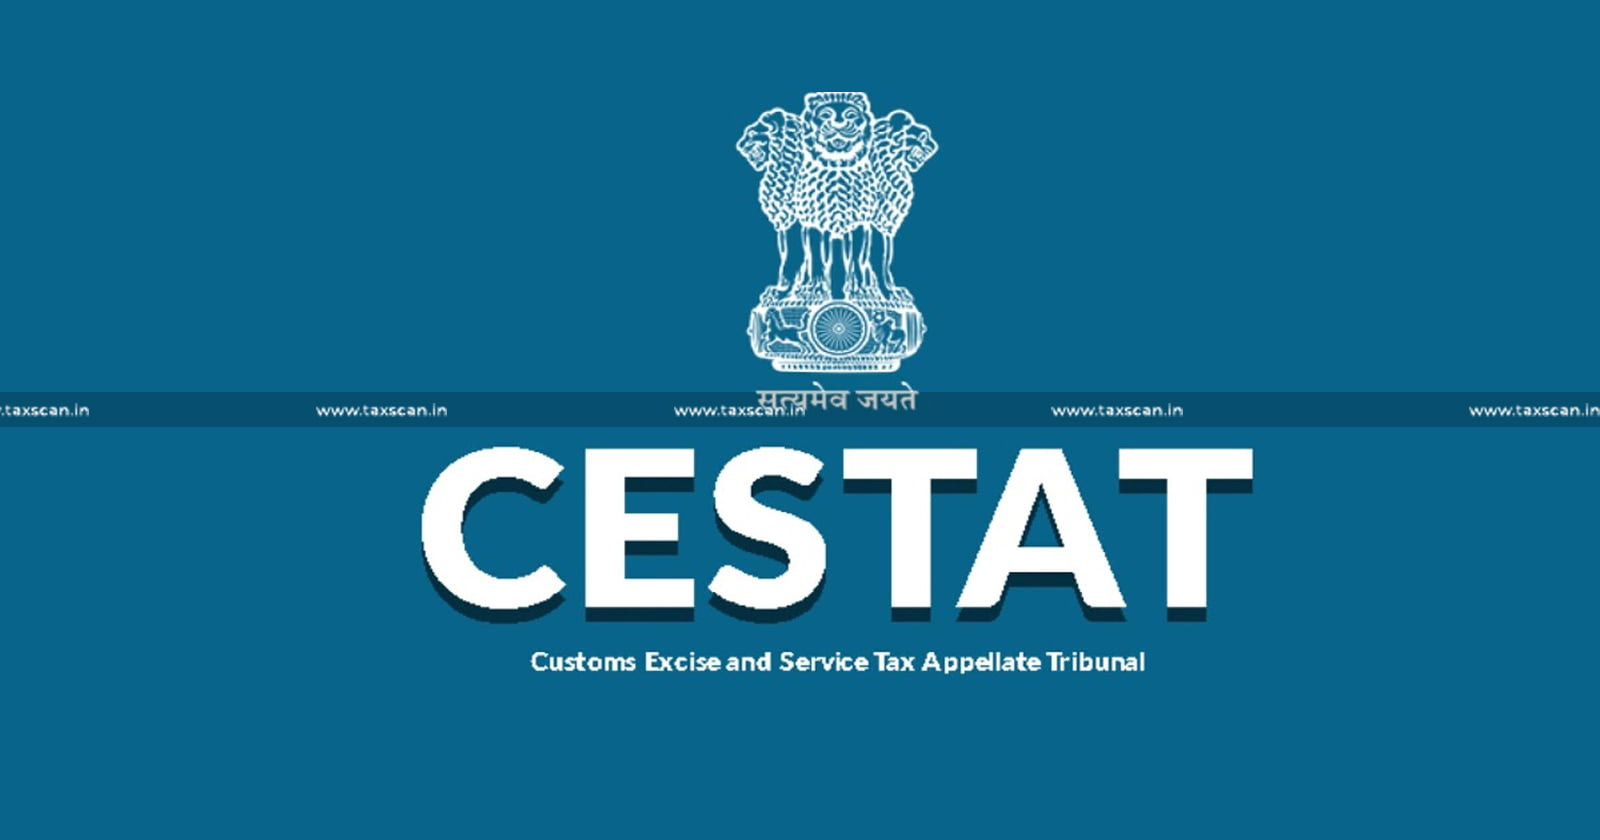 CESTAT- NIDB - Customs Commissioner - Imported Goods - Customs - Excise and Service Tax Appellate TribunaL - TAXSCAN